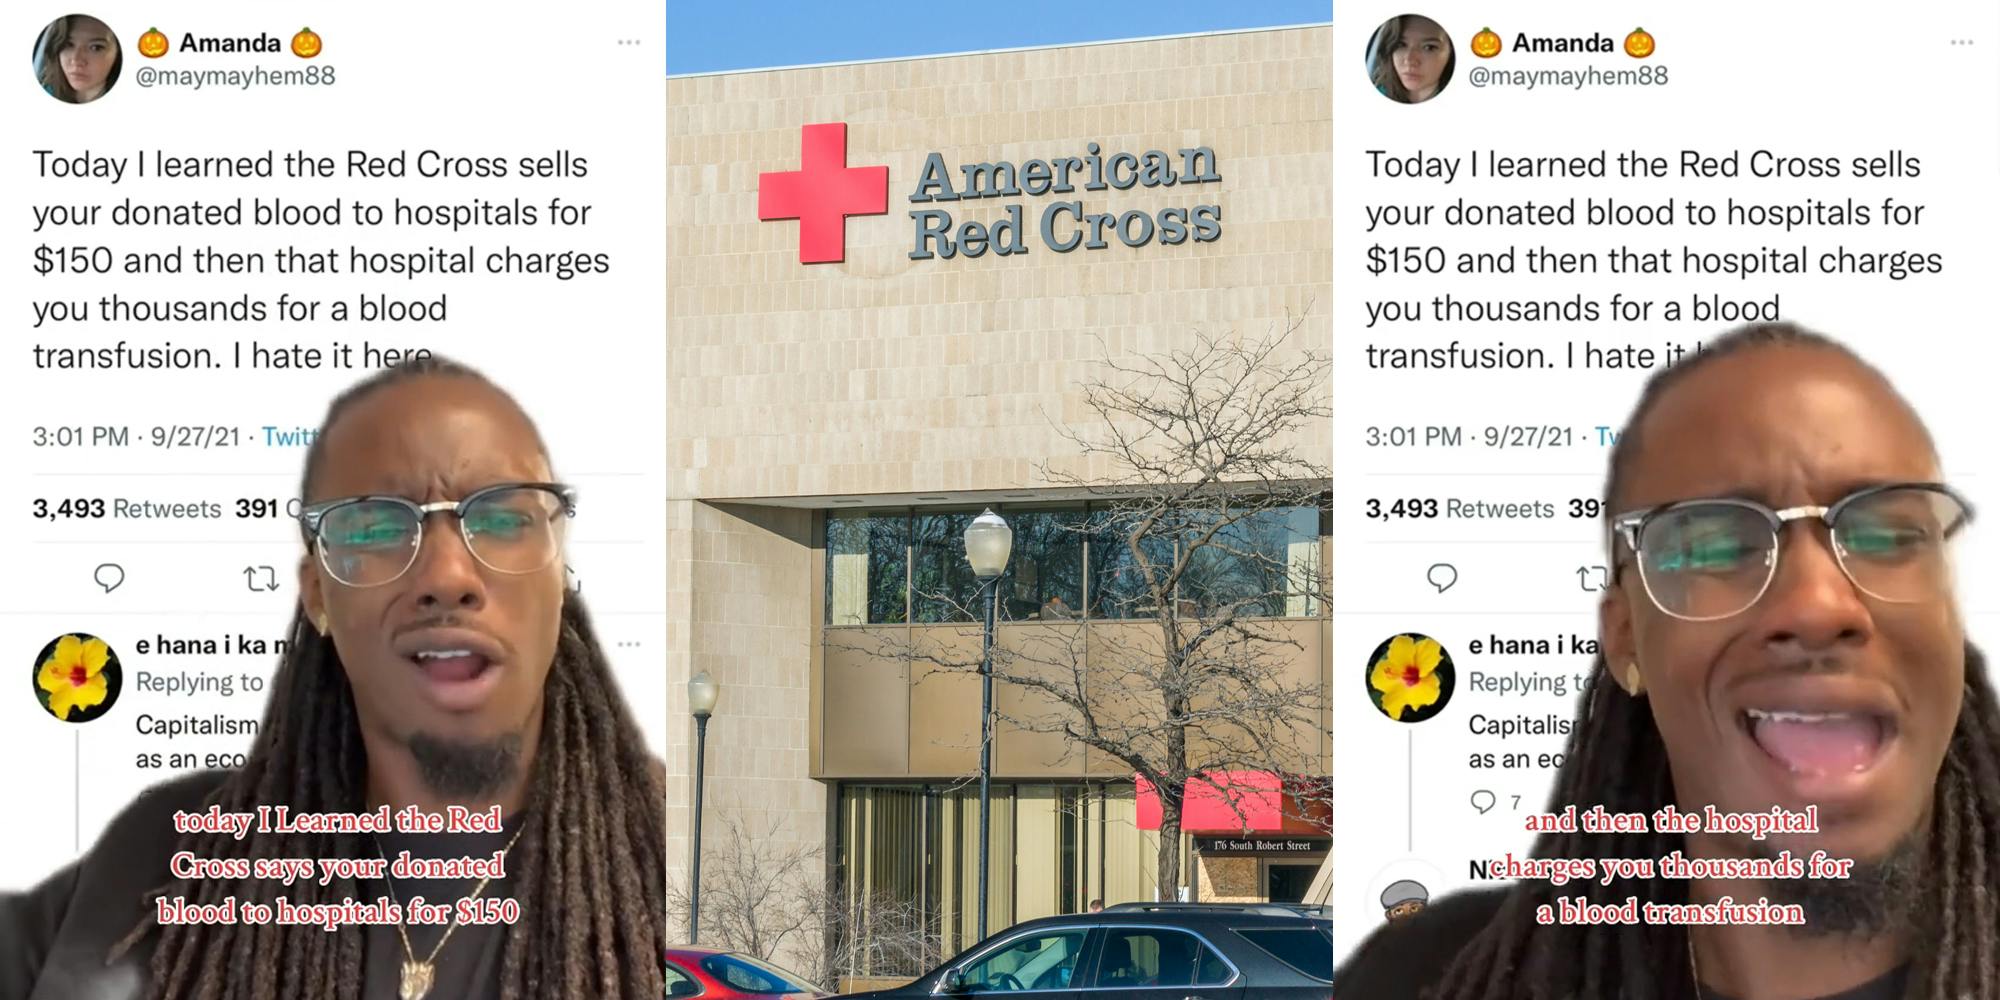 man greenscreen TikTok over Tweet with caption "today I Learned the Red Cross says ur donated blood to hospitals for $150" (l) Red Cross building with sign (c) man greenscreen TikTok over Tweet with caption "and then the hospital charges you thousands for a blood transfusion" (r)